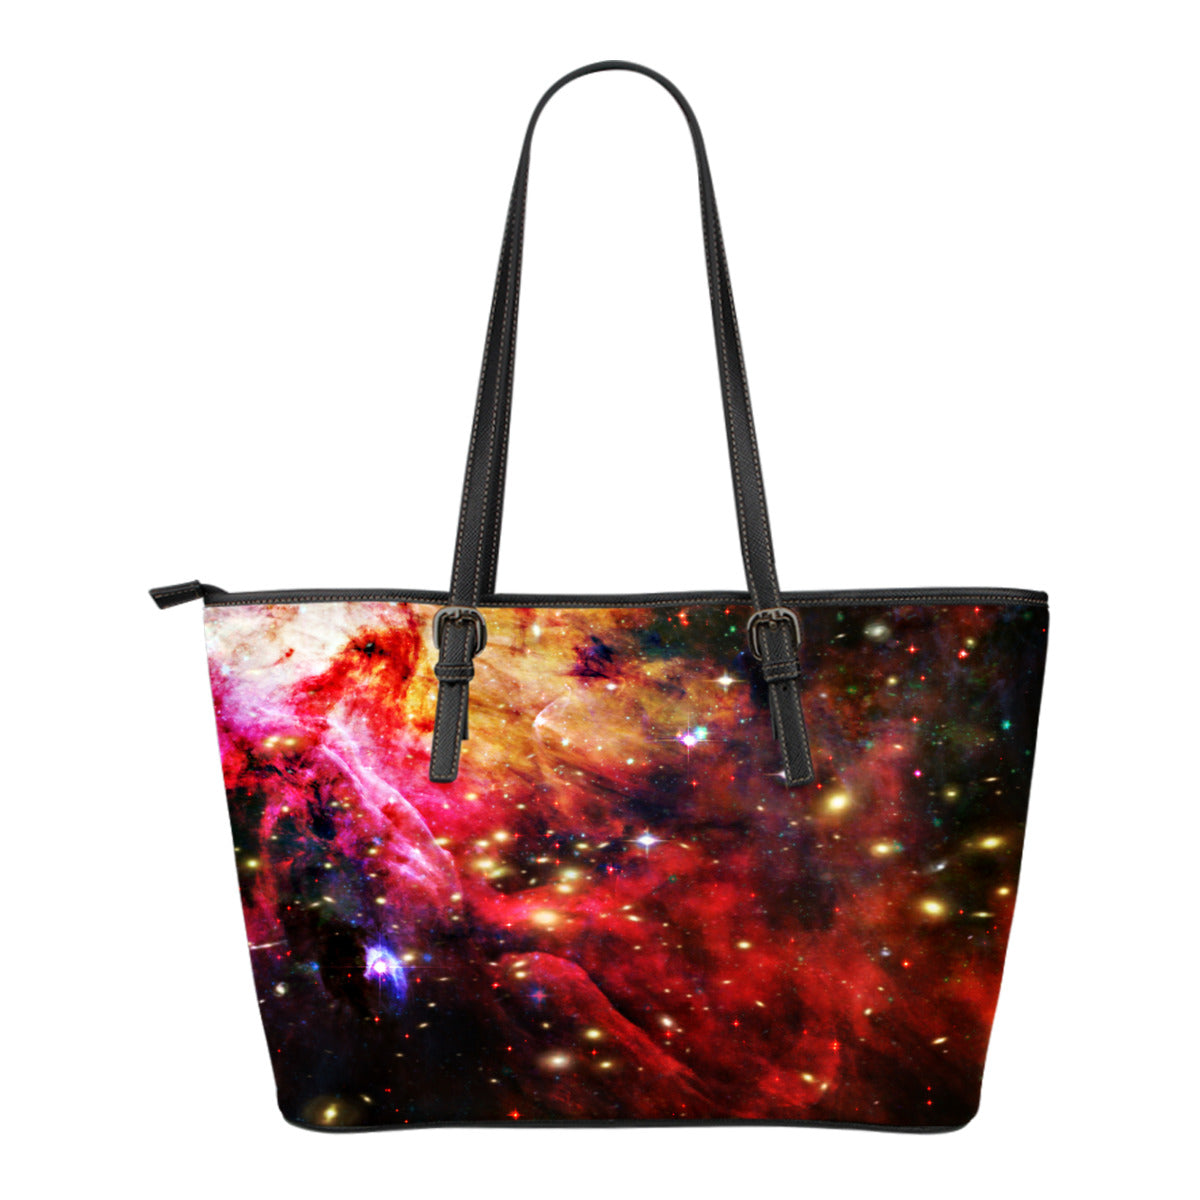 Galaxy Themed Design C89Women Small Leather Tote Bag